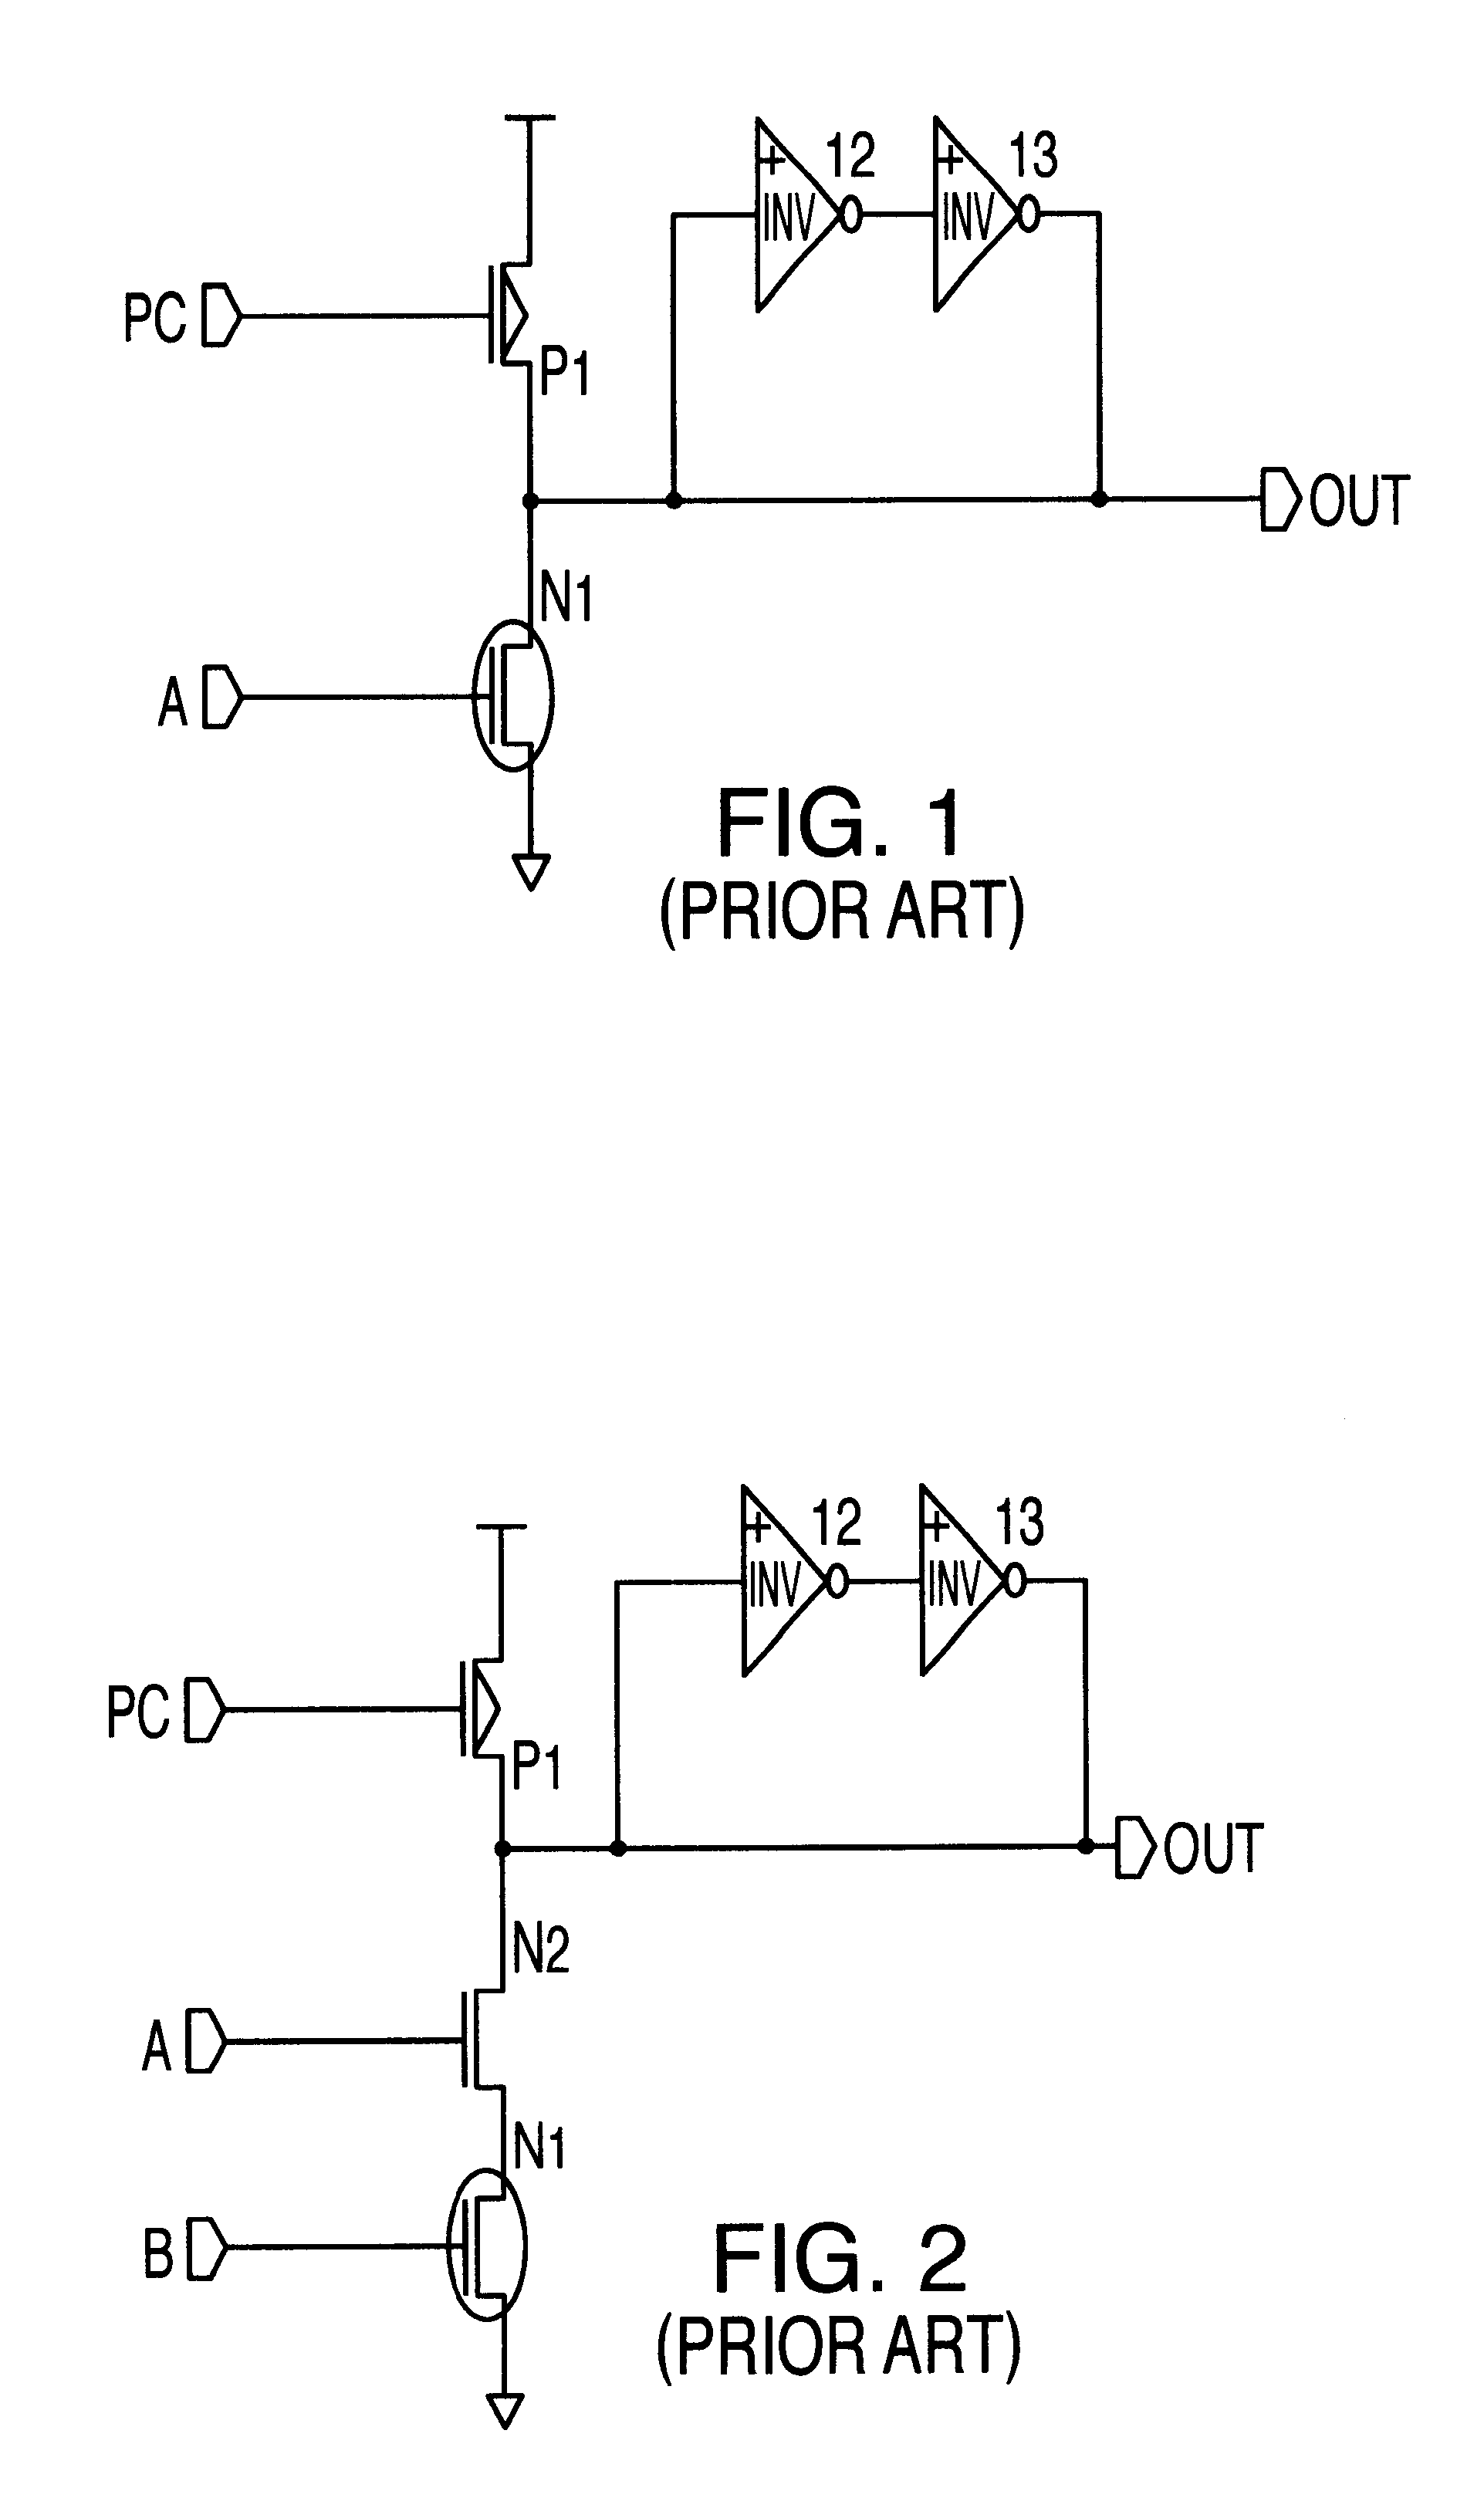 Method of reducing sub-threshold leakage in circuits during standby mode